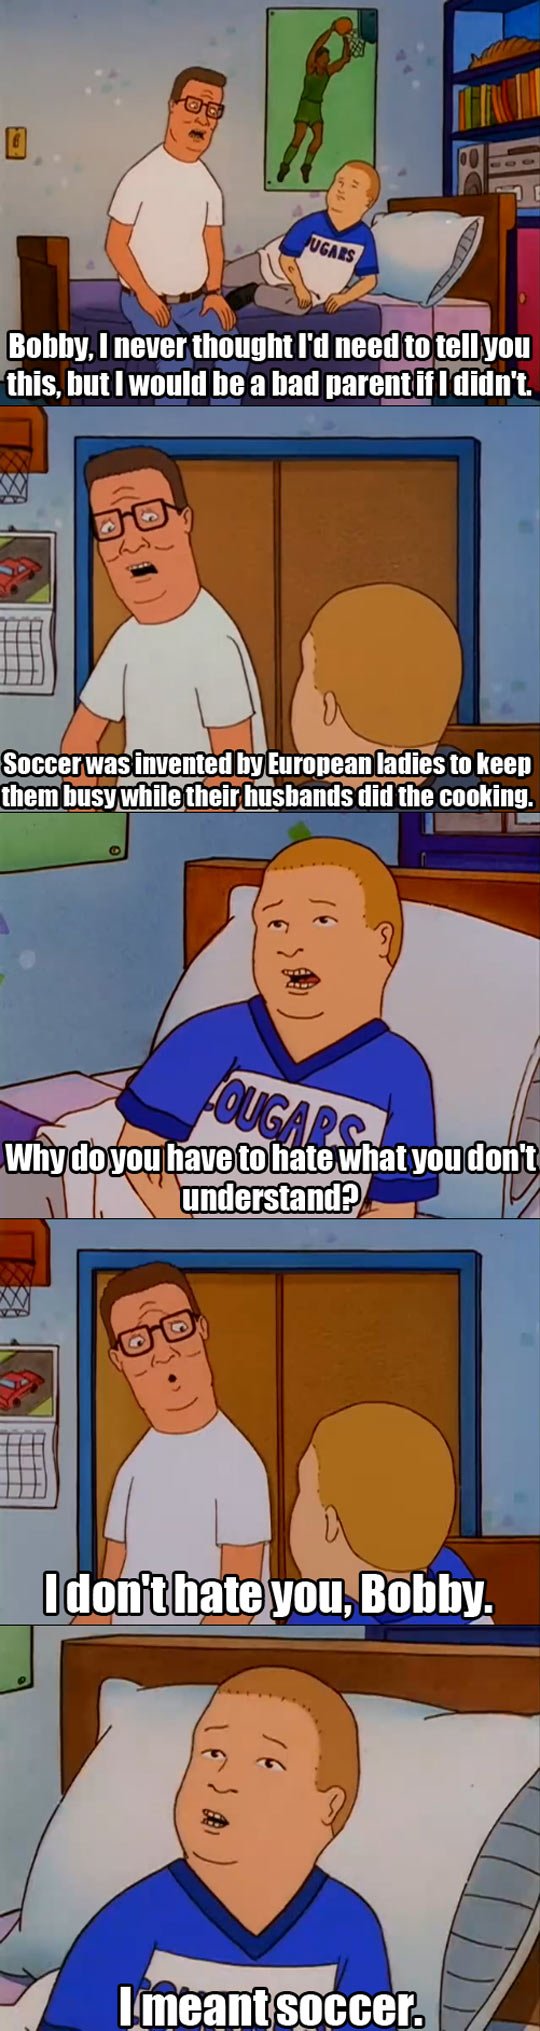 Soccer was invented by European ladies...